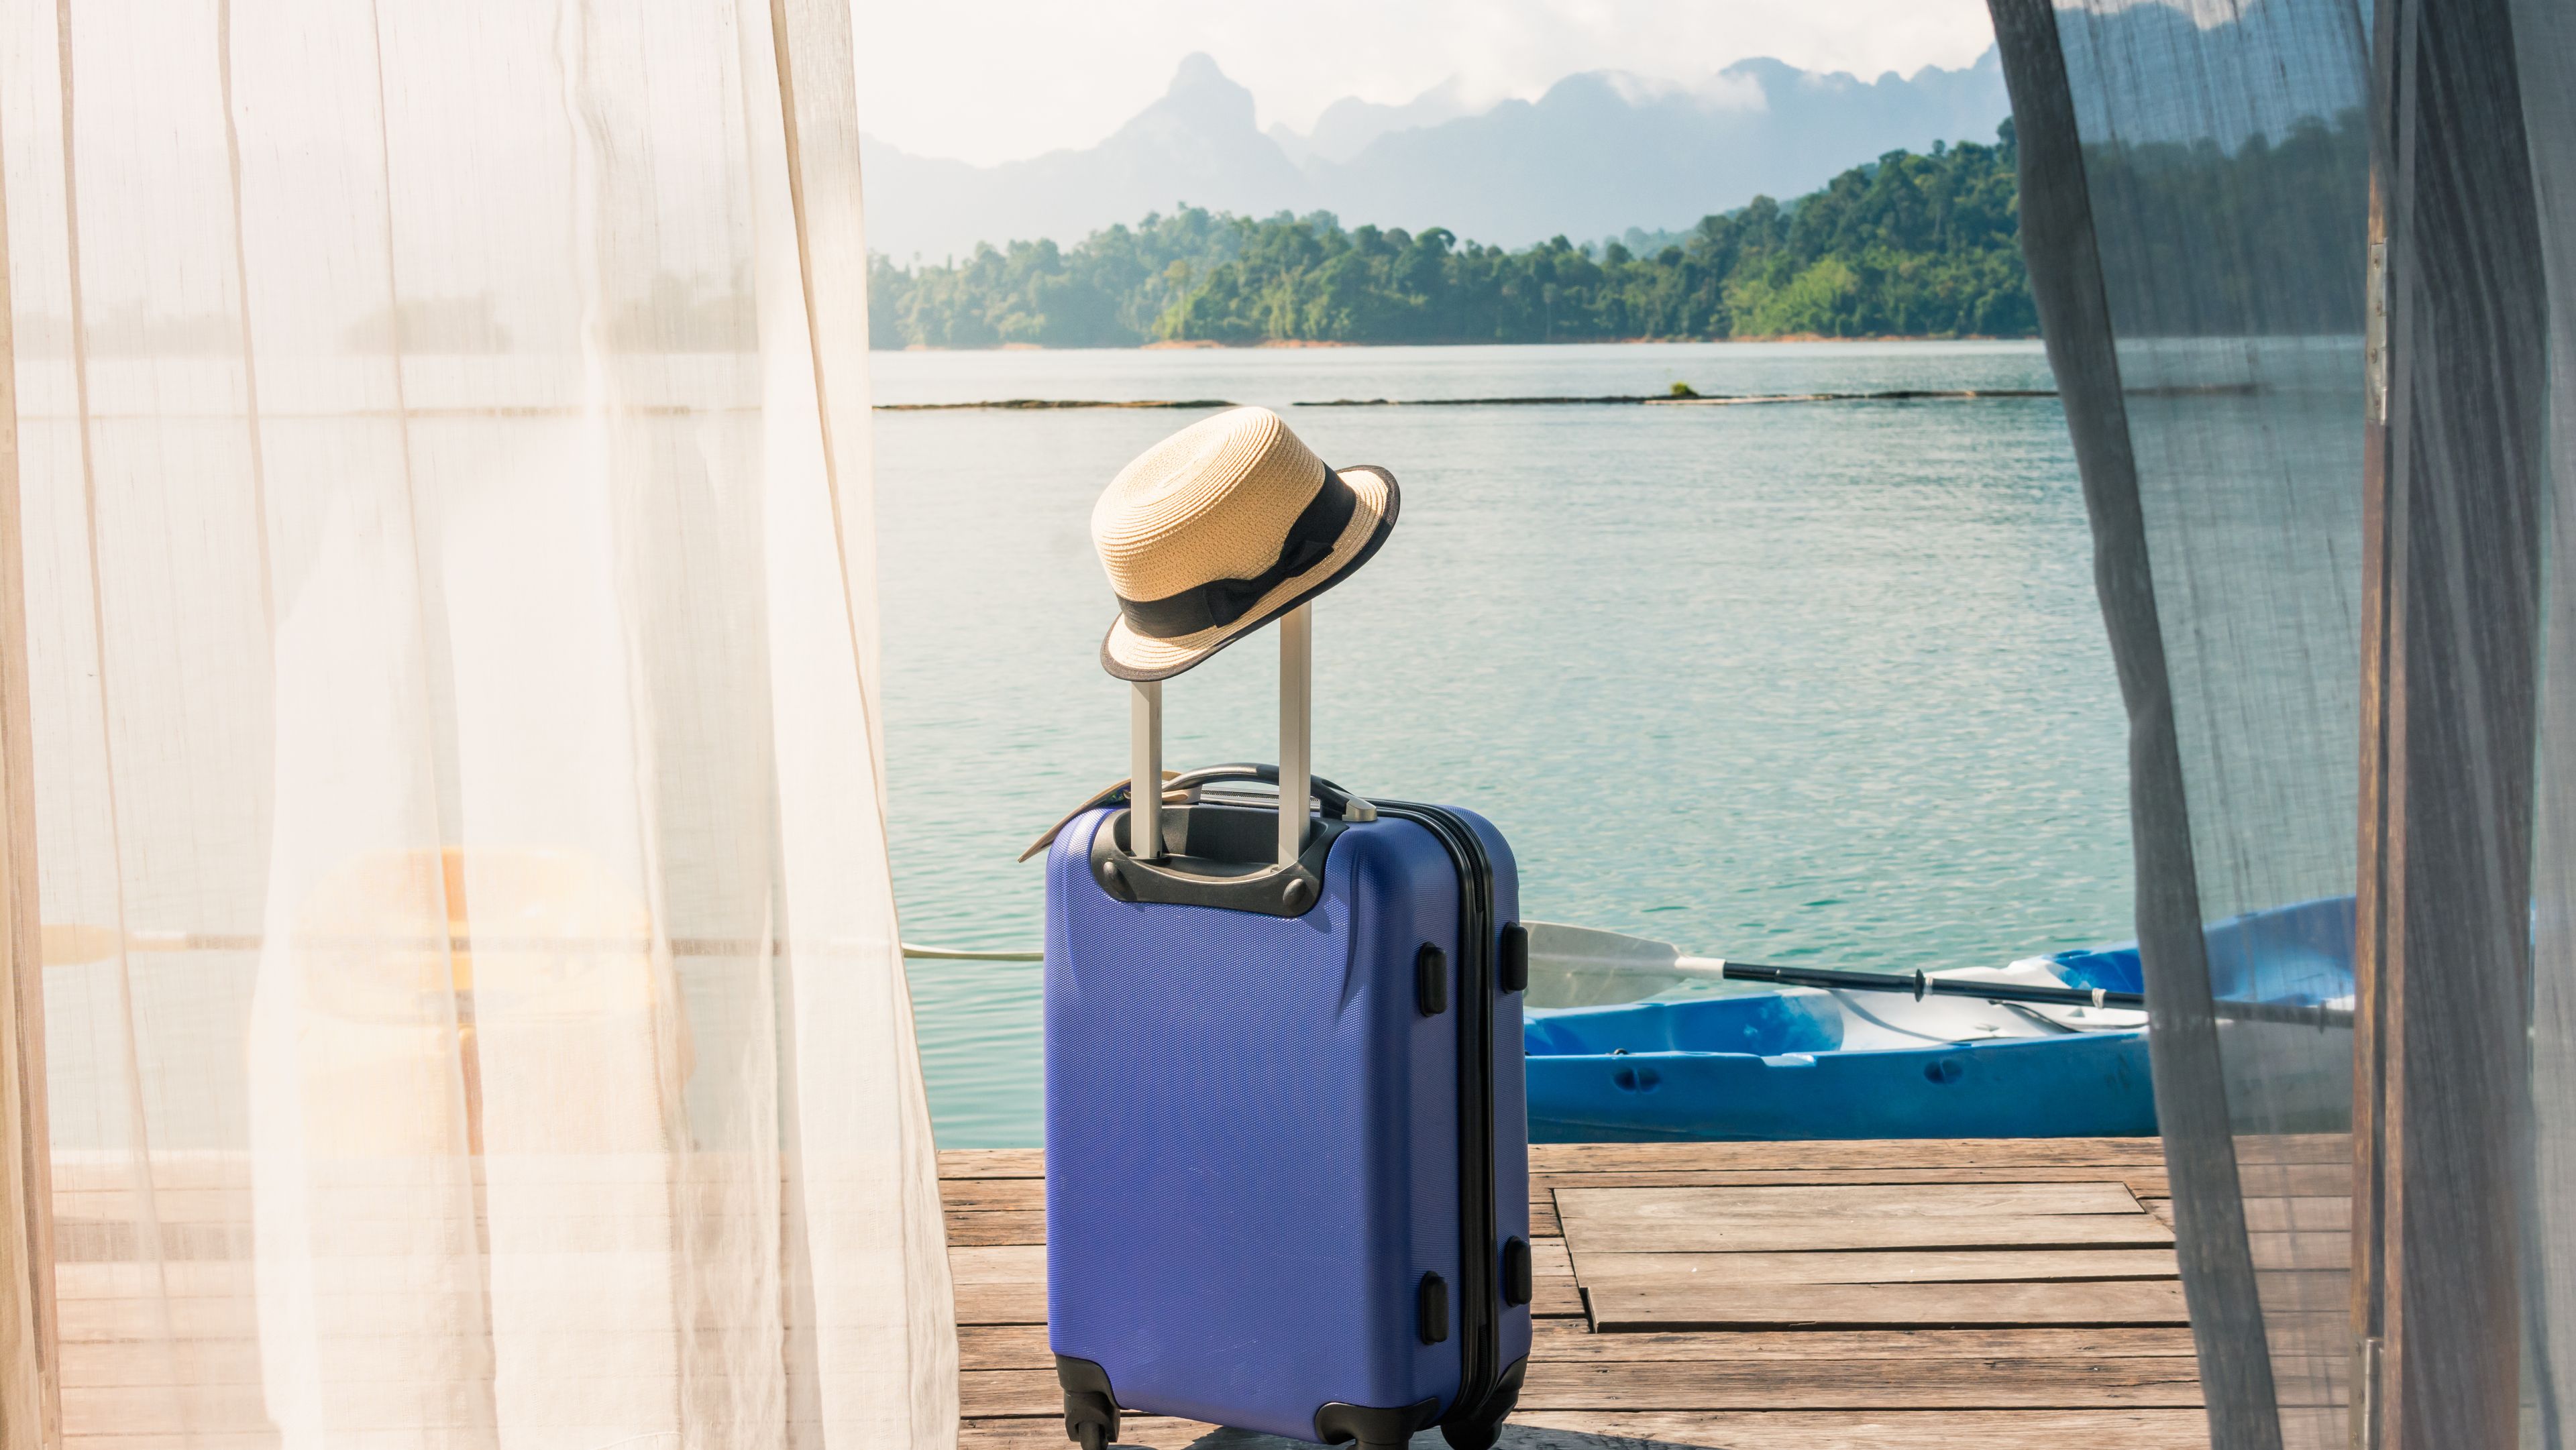 A suitcase stands on a jetty and in the background is a large lake